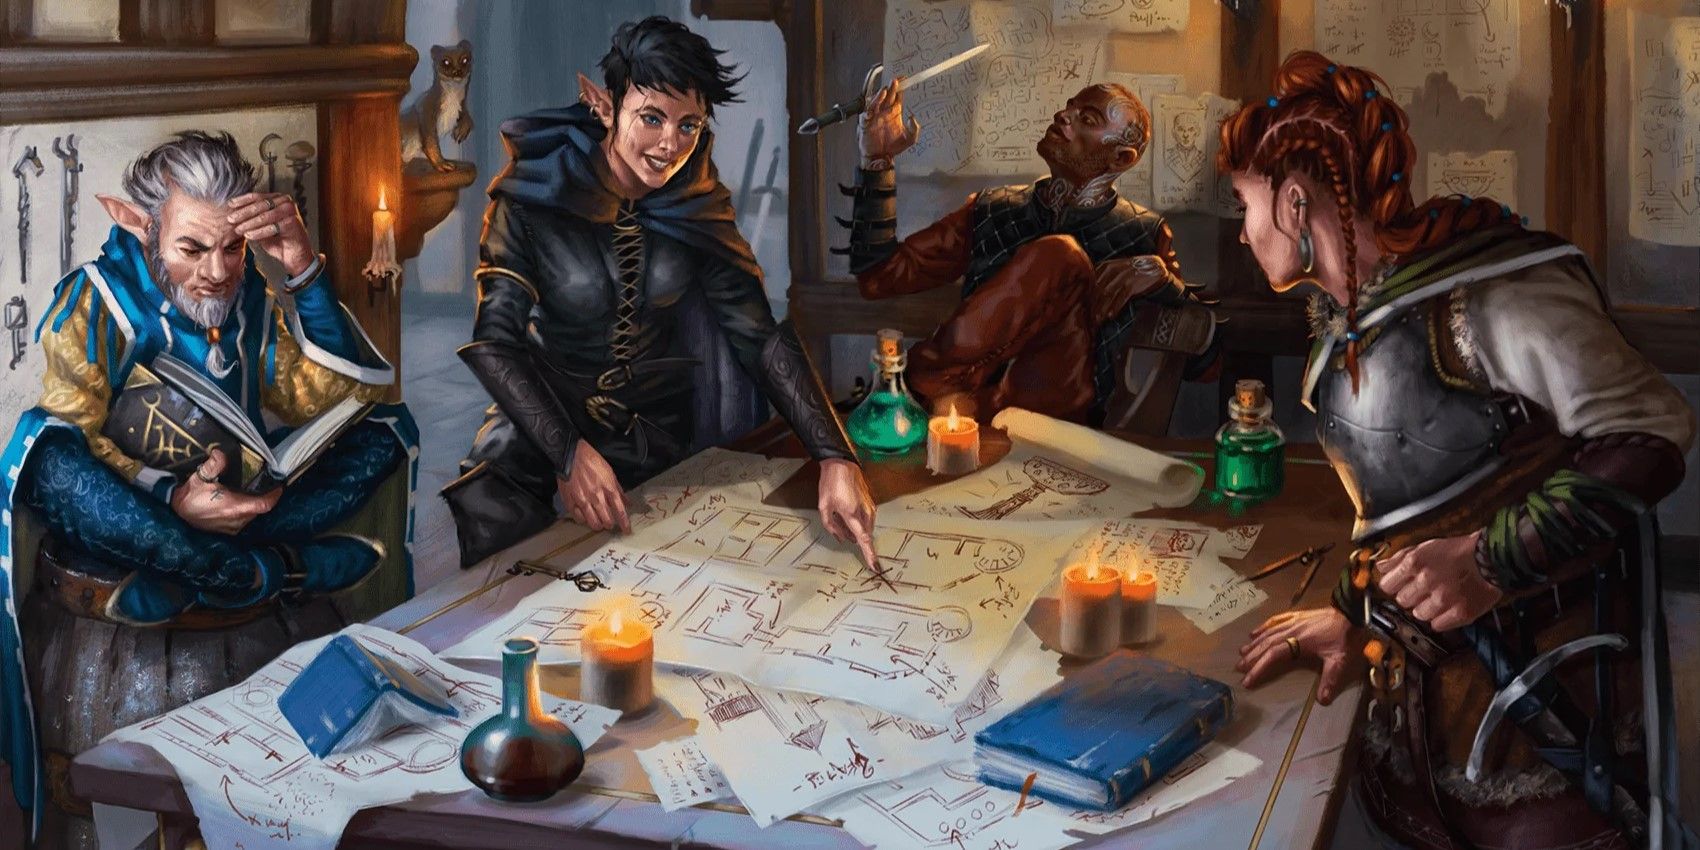 How To Build a Dungeons & Dragons Homebrew Setting Starting With a Single City